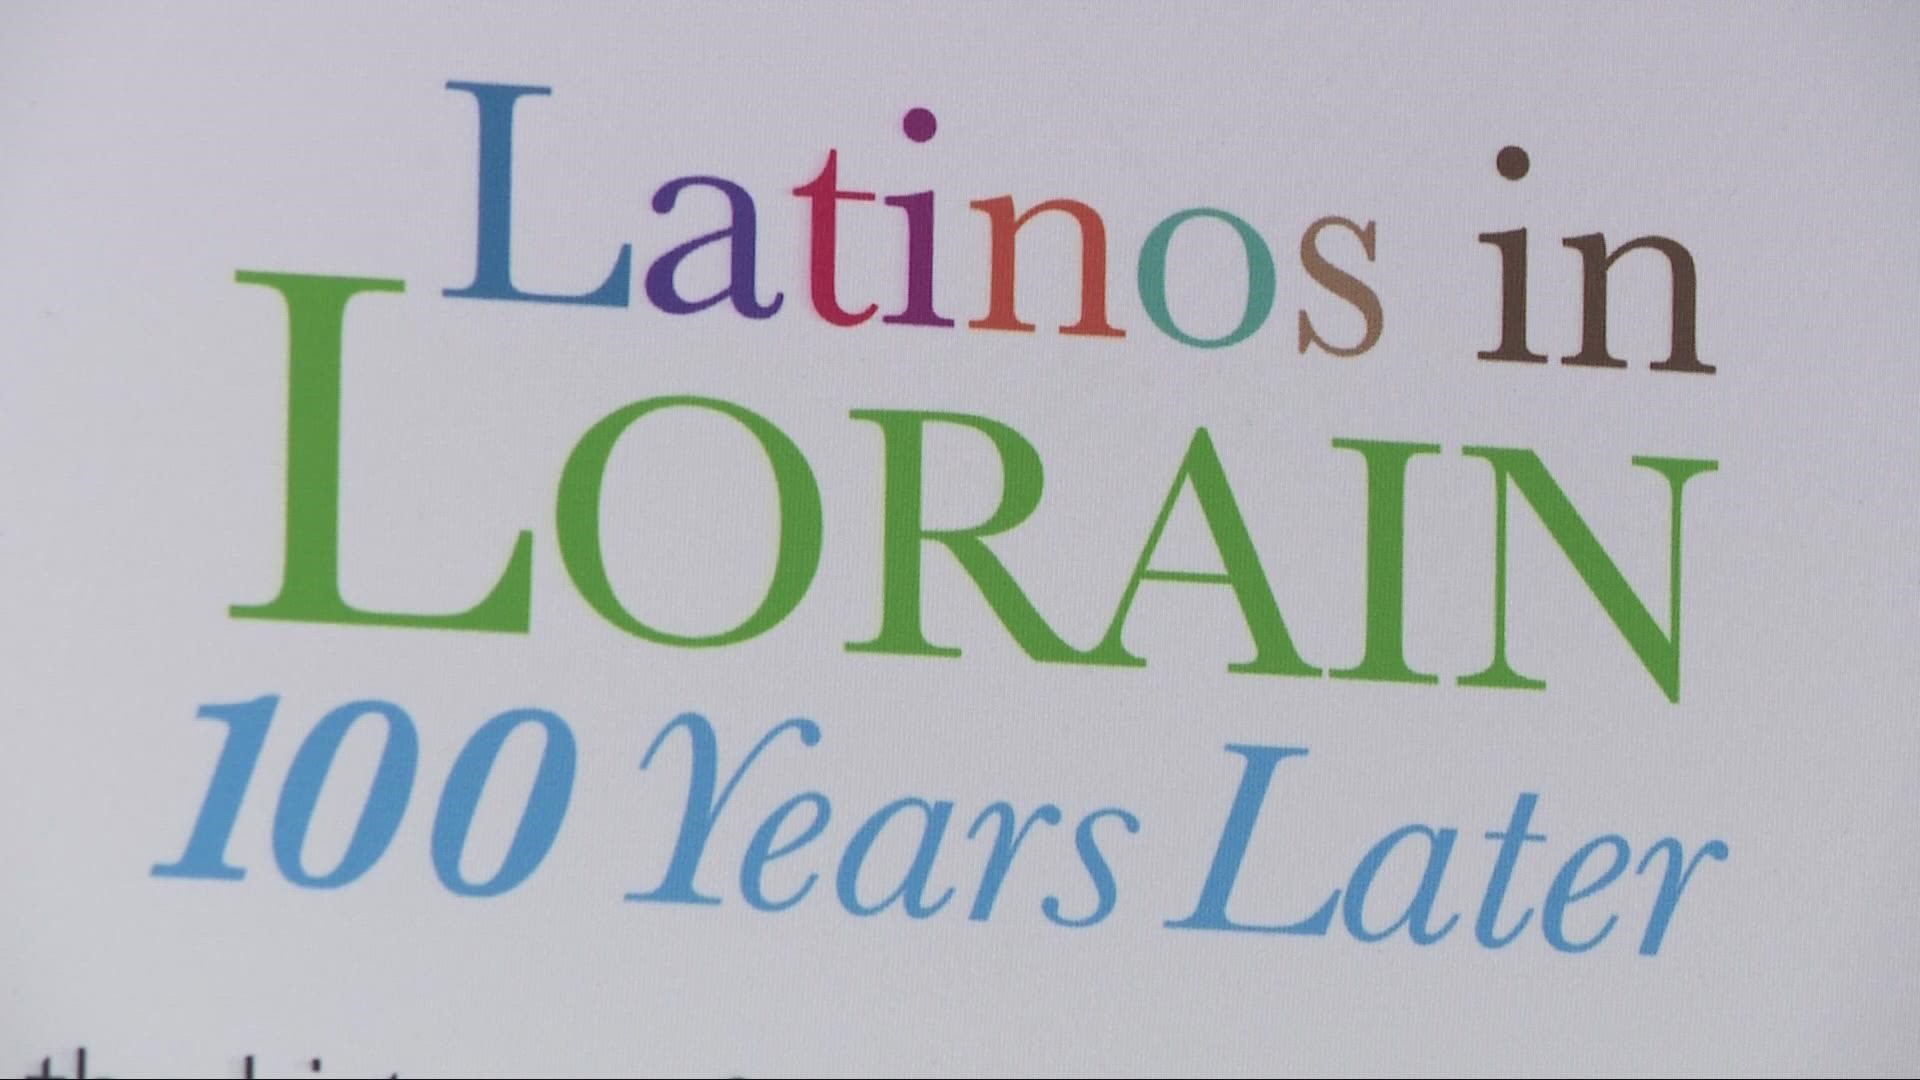 A traveling exhibit highlights the rich and long history of Latinos who settled in Lorain near Vine Avenue.